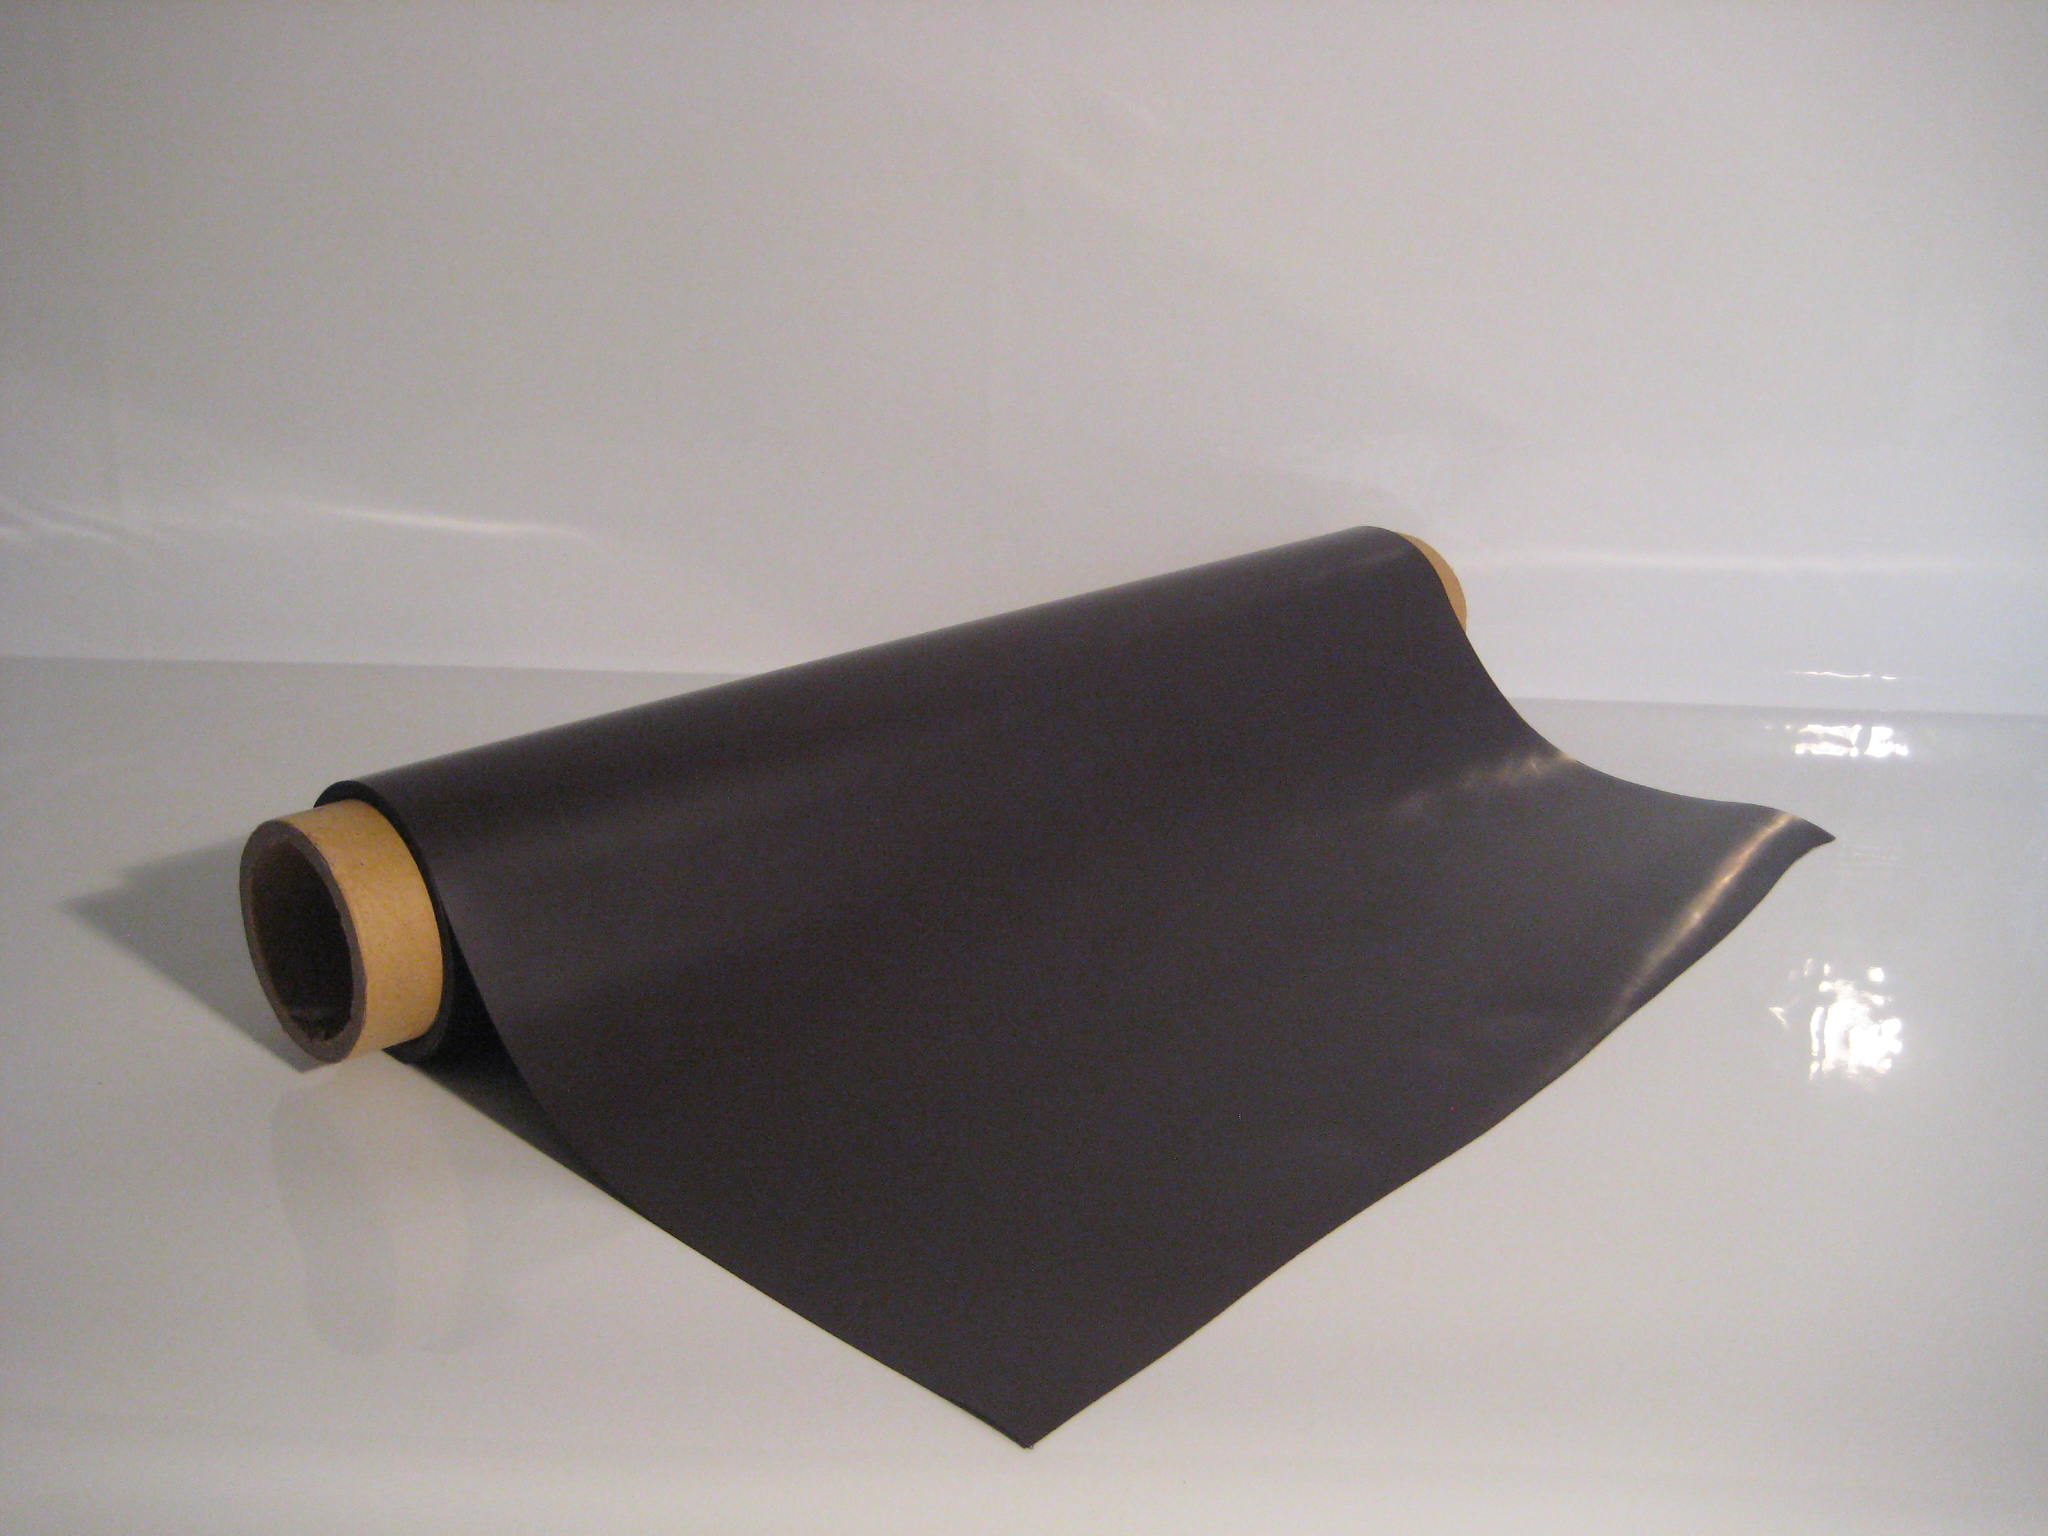 Large Self-Adhesive Magnetic Sheet 0.5mm/1mm Thick Strong Flexible Roll Magnet 